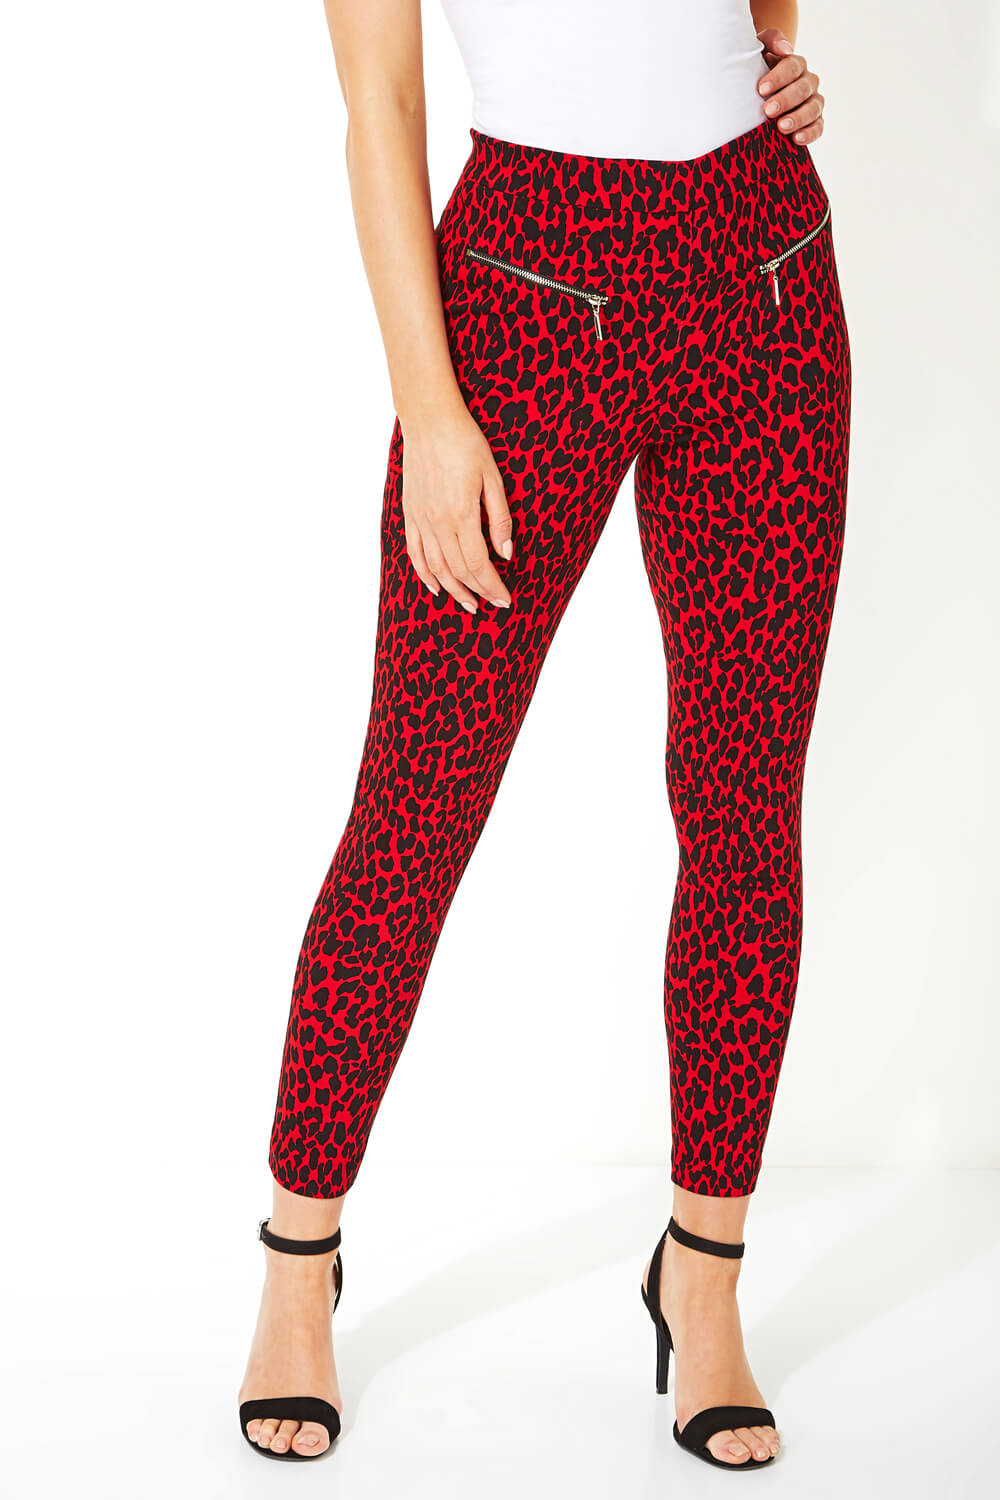 Red Animal Print Full Length Trousers , Image 2 of 5